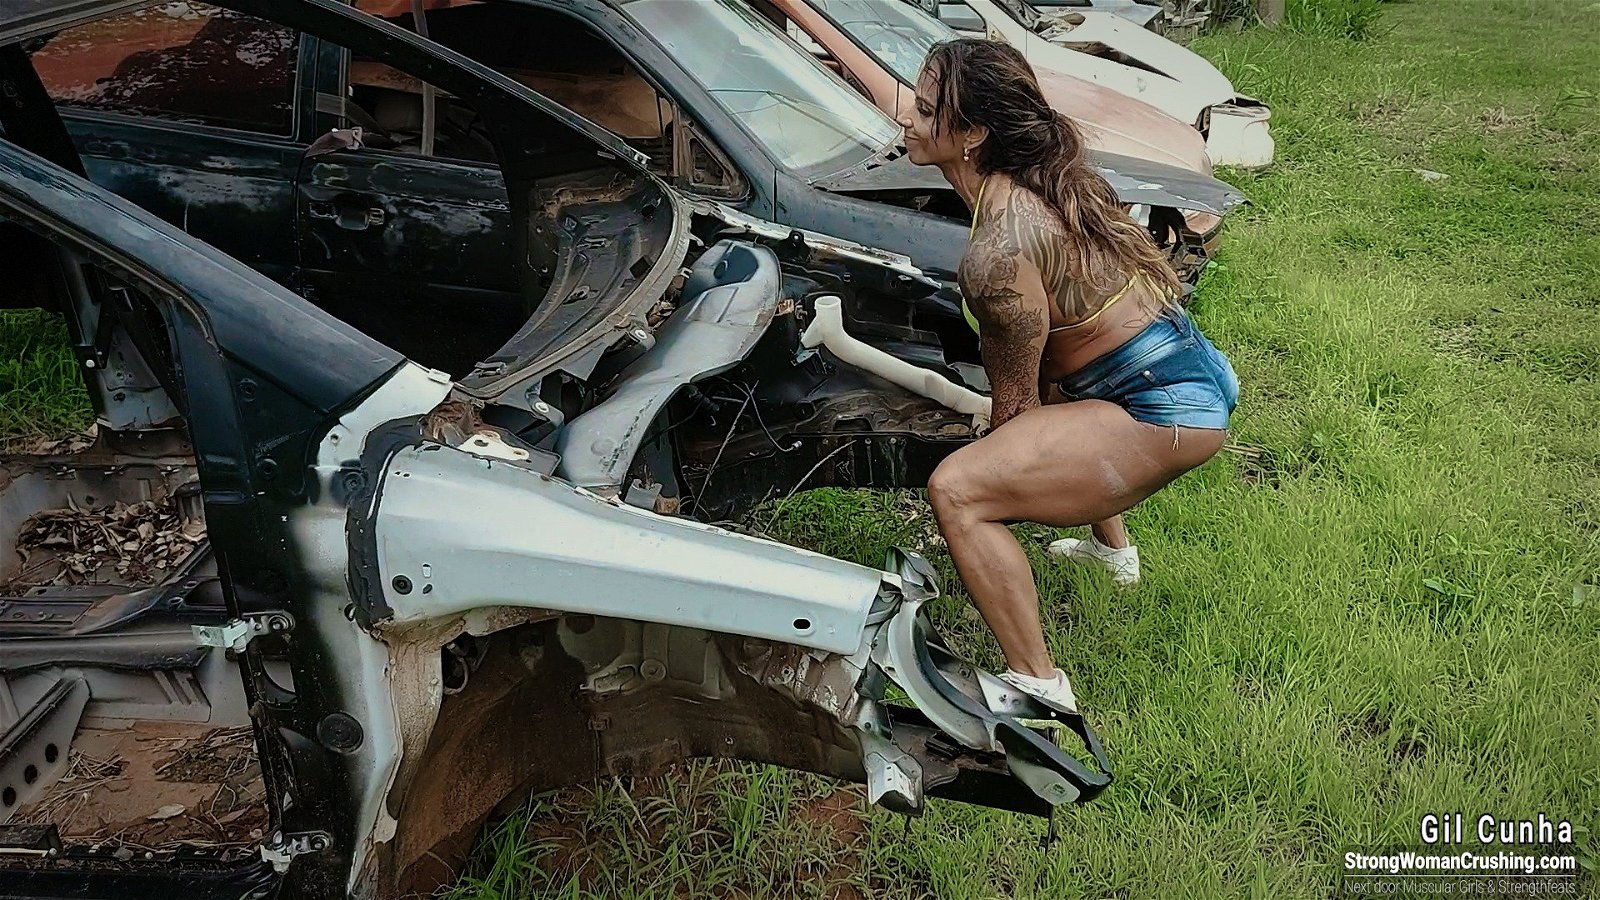 Photo by MusclegirlStrength with the username @MusclegirlStrength, who is a brand user,  August 23, 2023 at 3:22 PM and the text says '💪🏽 Pump up your muscles with Gil Cunha! 💪🏽 Get a membership to watch her video and learn how she uses a scrap car to do it. 🚗 Visit https://www.strongwomancrushing.com/ 💪🏽 #strongwoman #scrapcar #musclepump #GilCunha #strongwomancrushing'